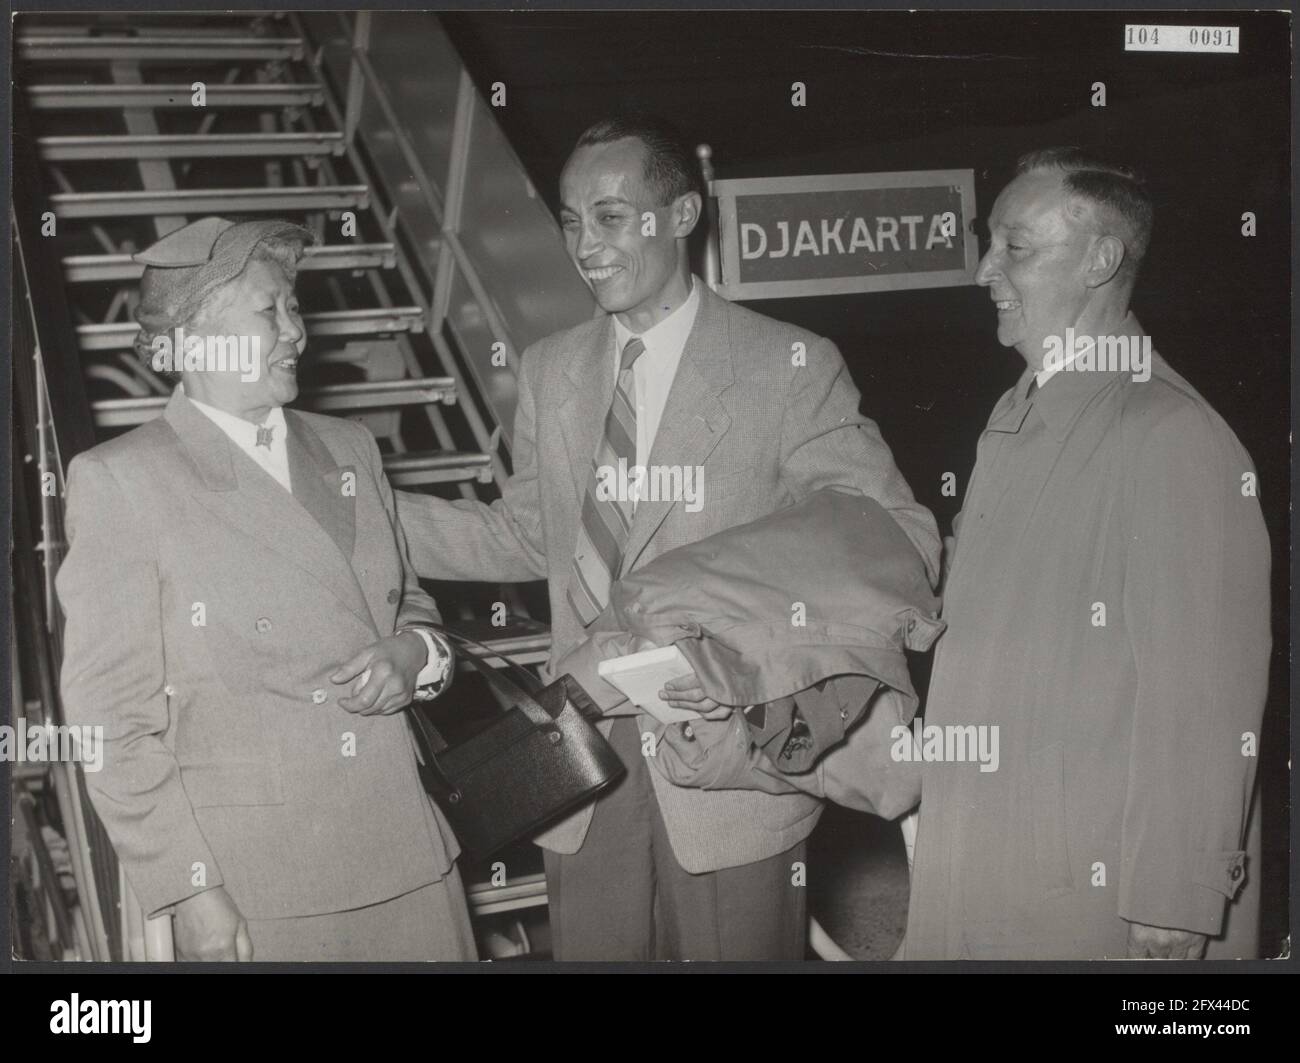 The newly appointed commander of the Dutch United Nations detachment, Lieutenant Colonel C. Knulst from The Hague at Schiphol Airport before departing for Korea. The commander says goodbye to his parents, July 20, 1953, military, officers, departures, airports, The Netherlands, 20th century press agency photo, news to remember, documentary, historic photography 1945-1990, visual stories, human history of the Twentieth Century, capturing moments in time Stock Photo